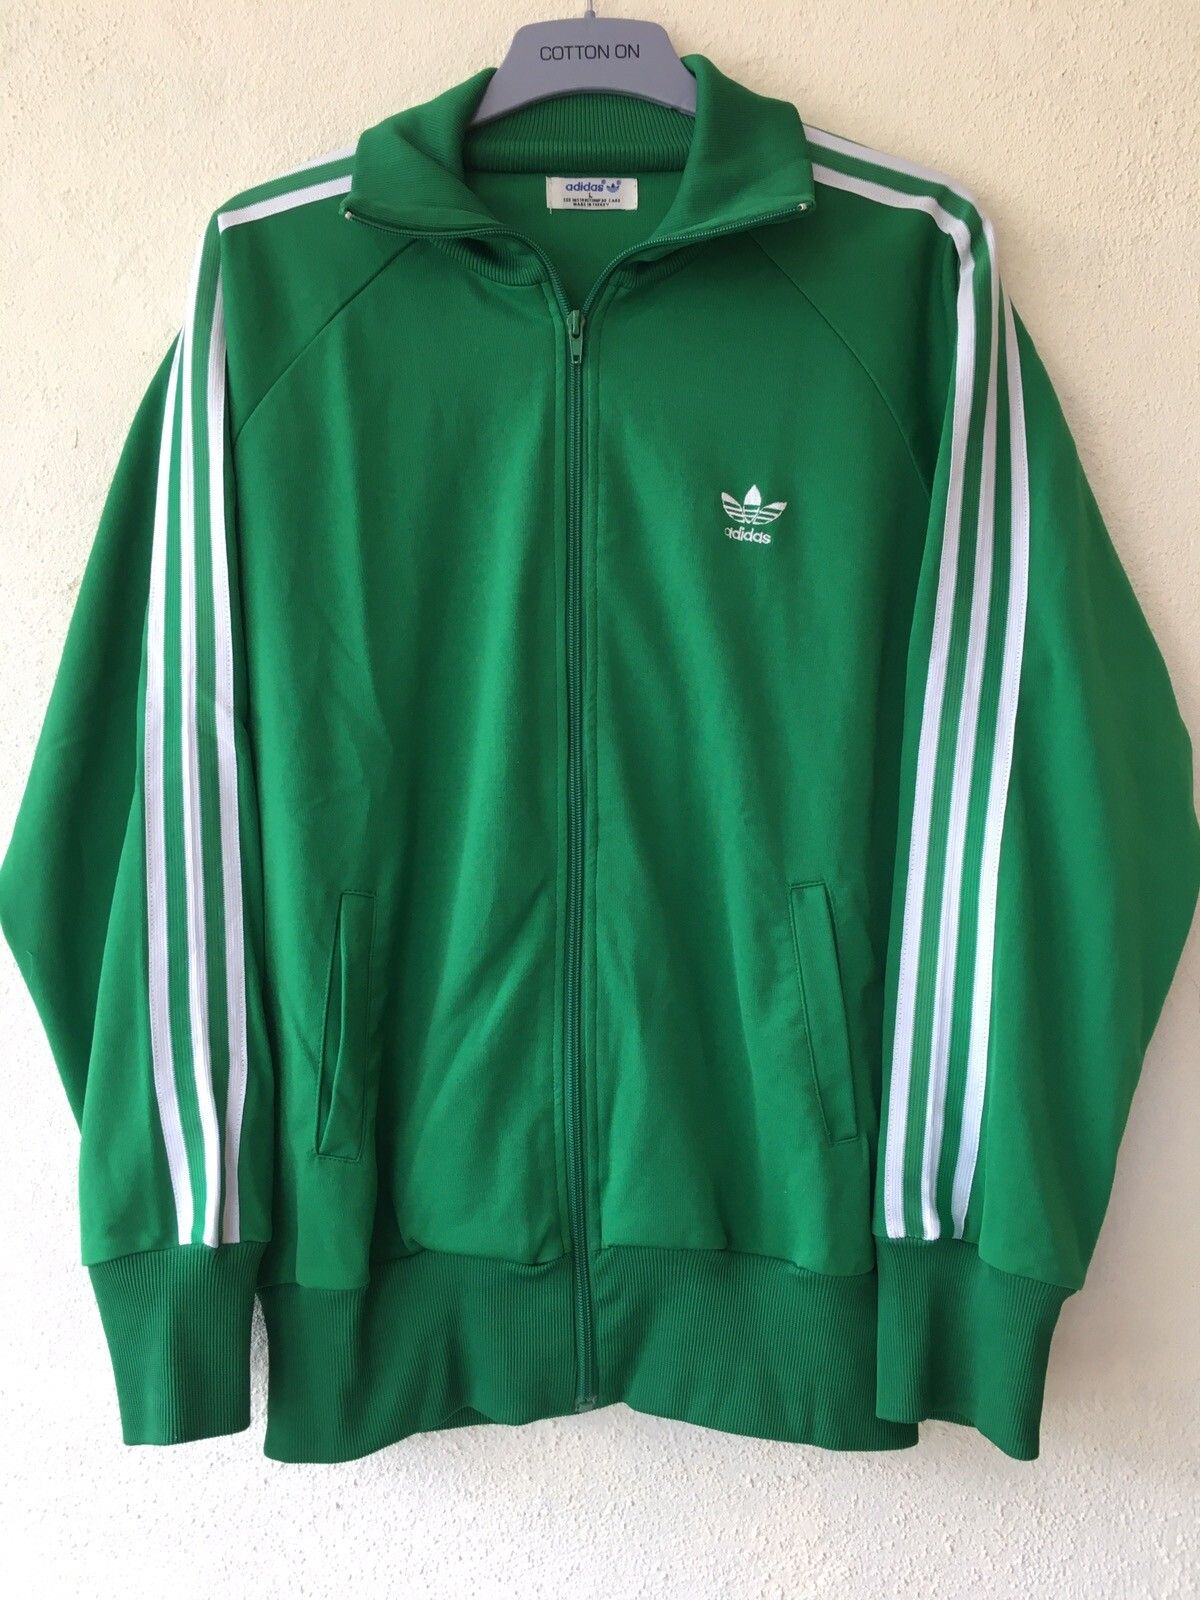 Adidas vintage 90s adidas track top Size US L / EU 52-54 / 3 - 1 Preview